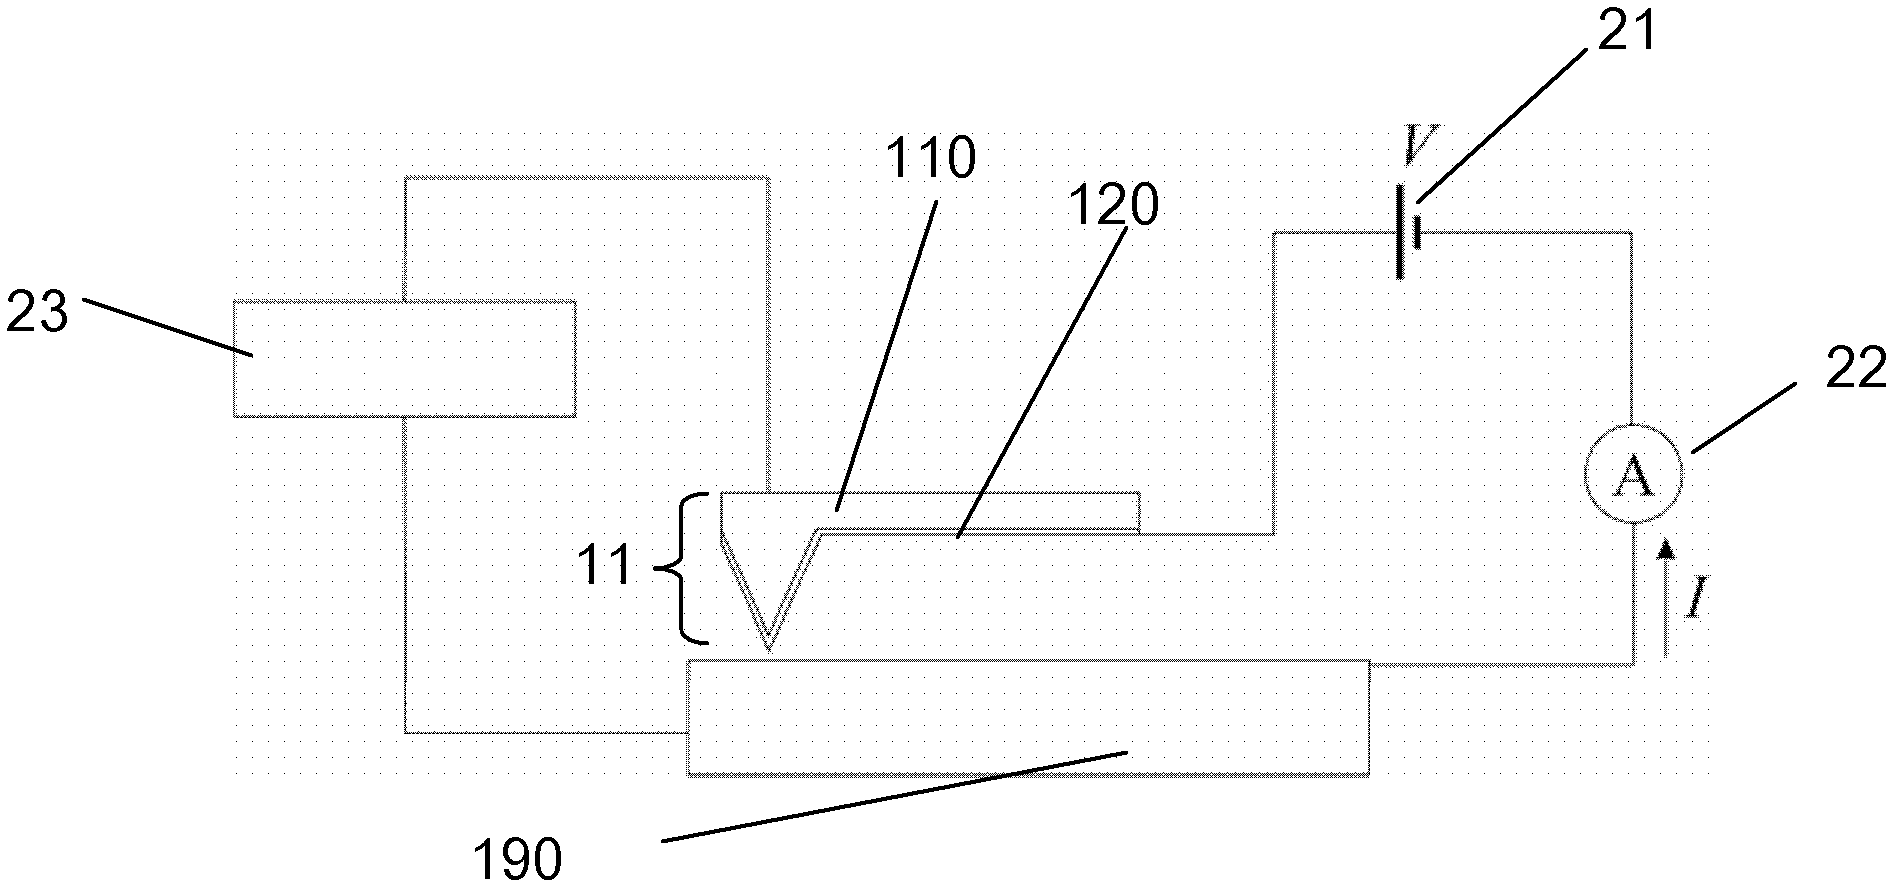 Probe of conducting atomic force microscope and measuring methods employing probe